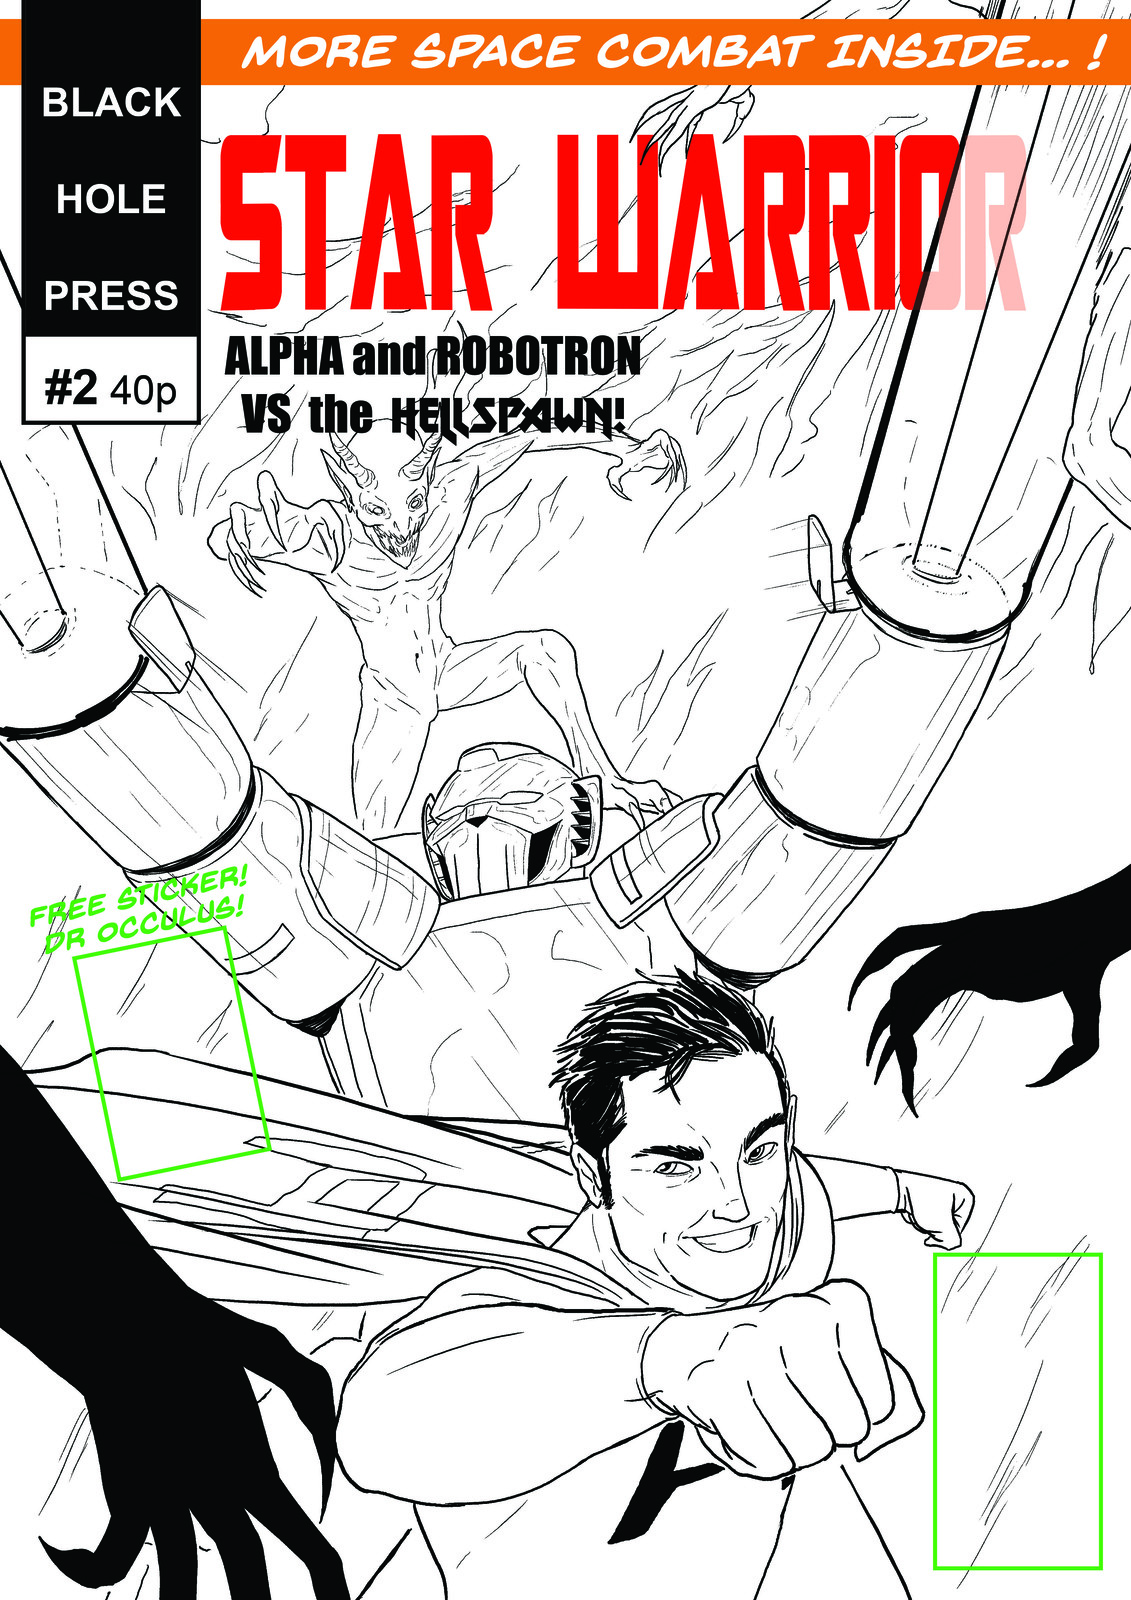 Cover Inks